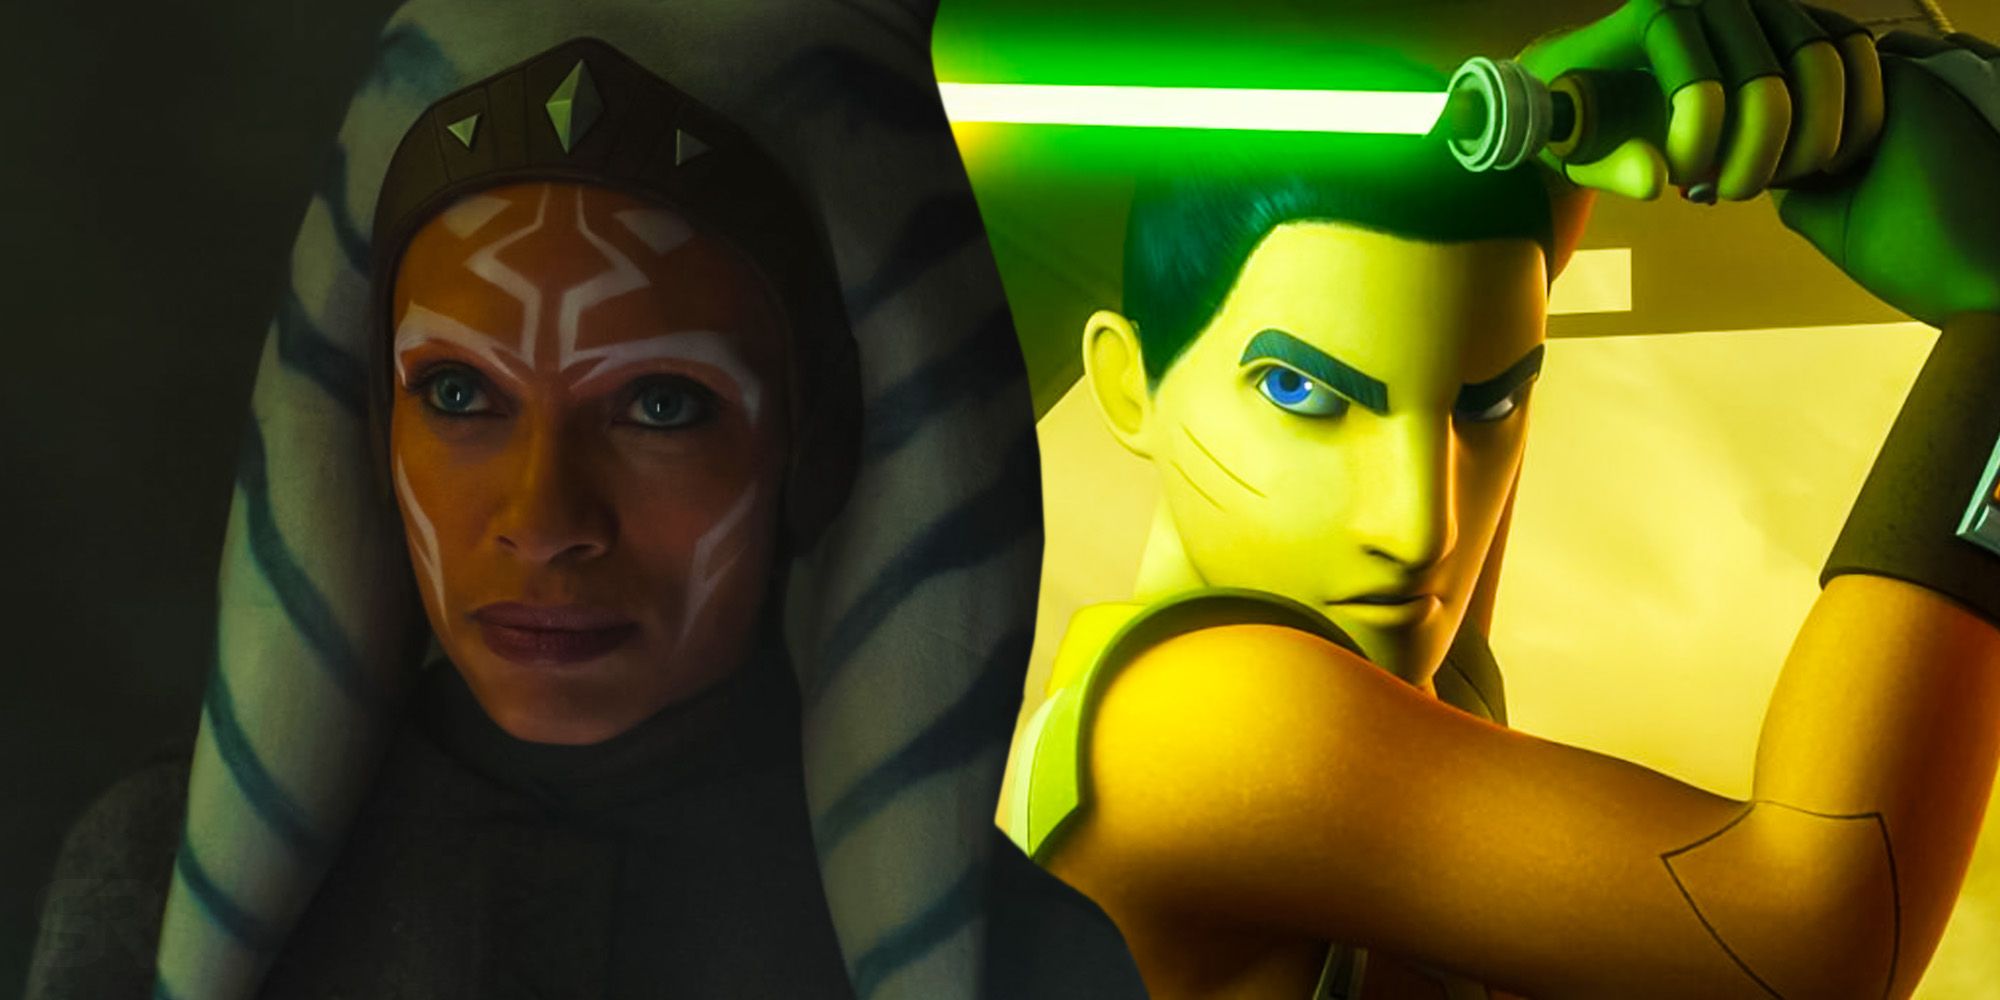 rebel's ezrea may appear in the ahsoka series, but not how you expect